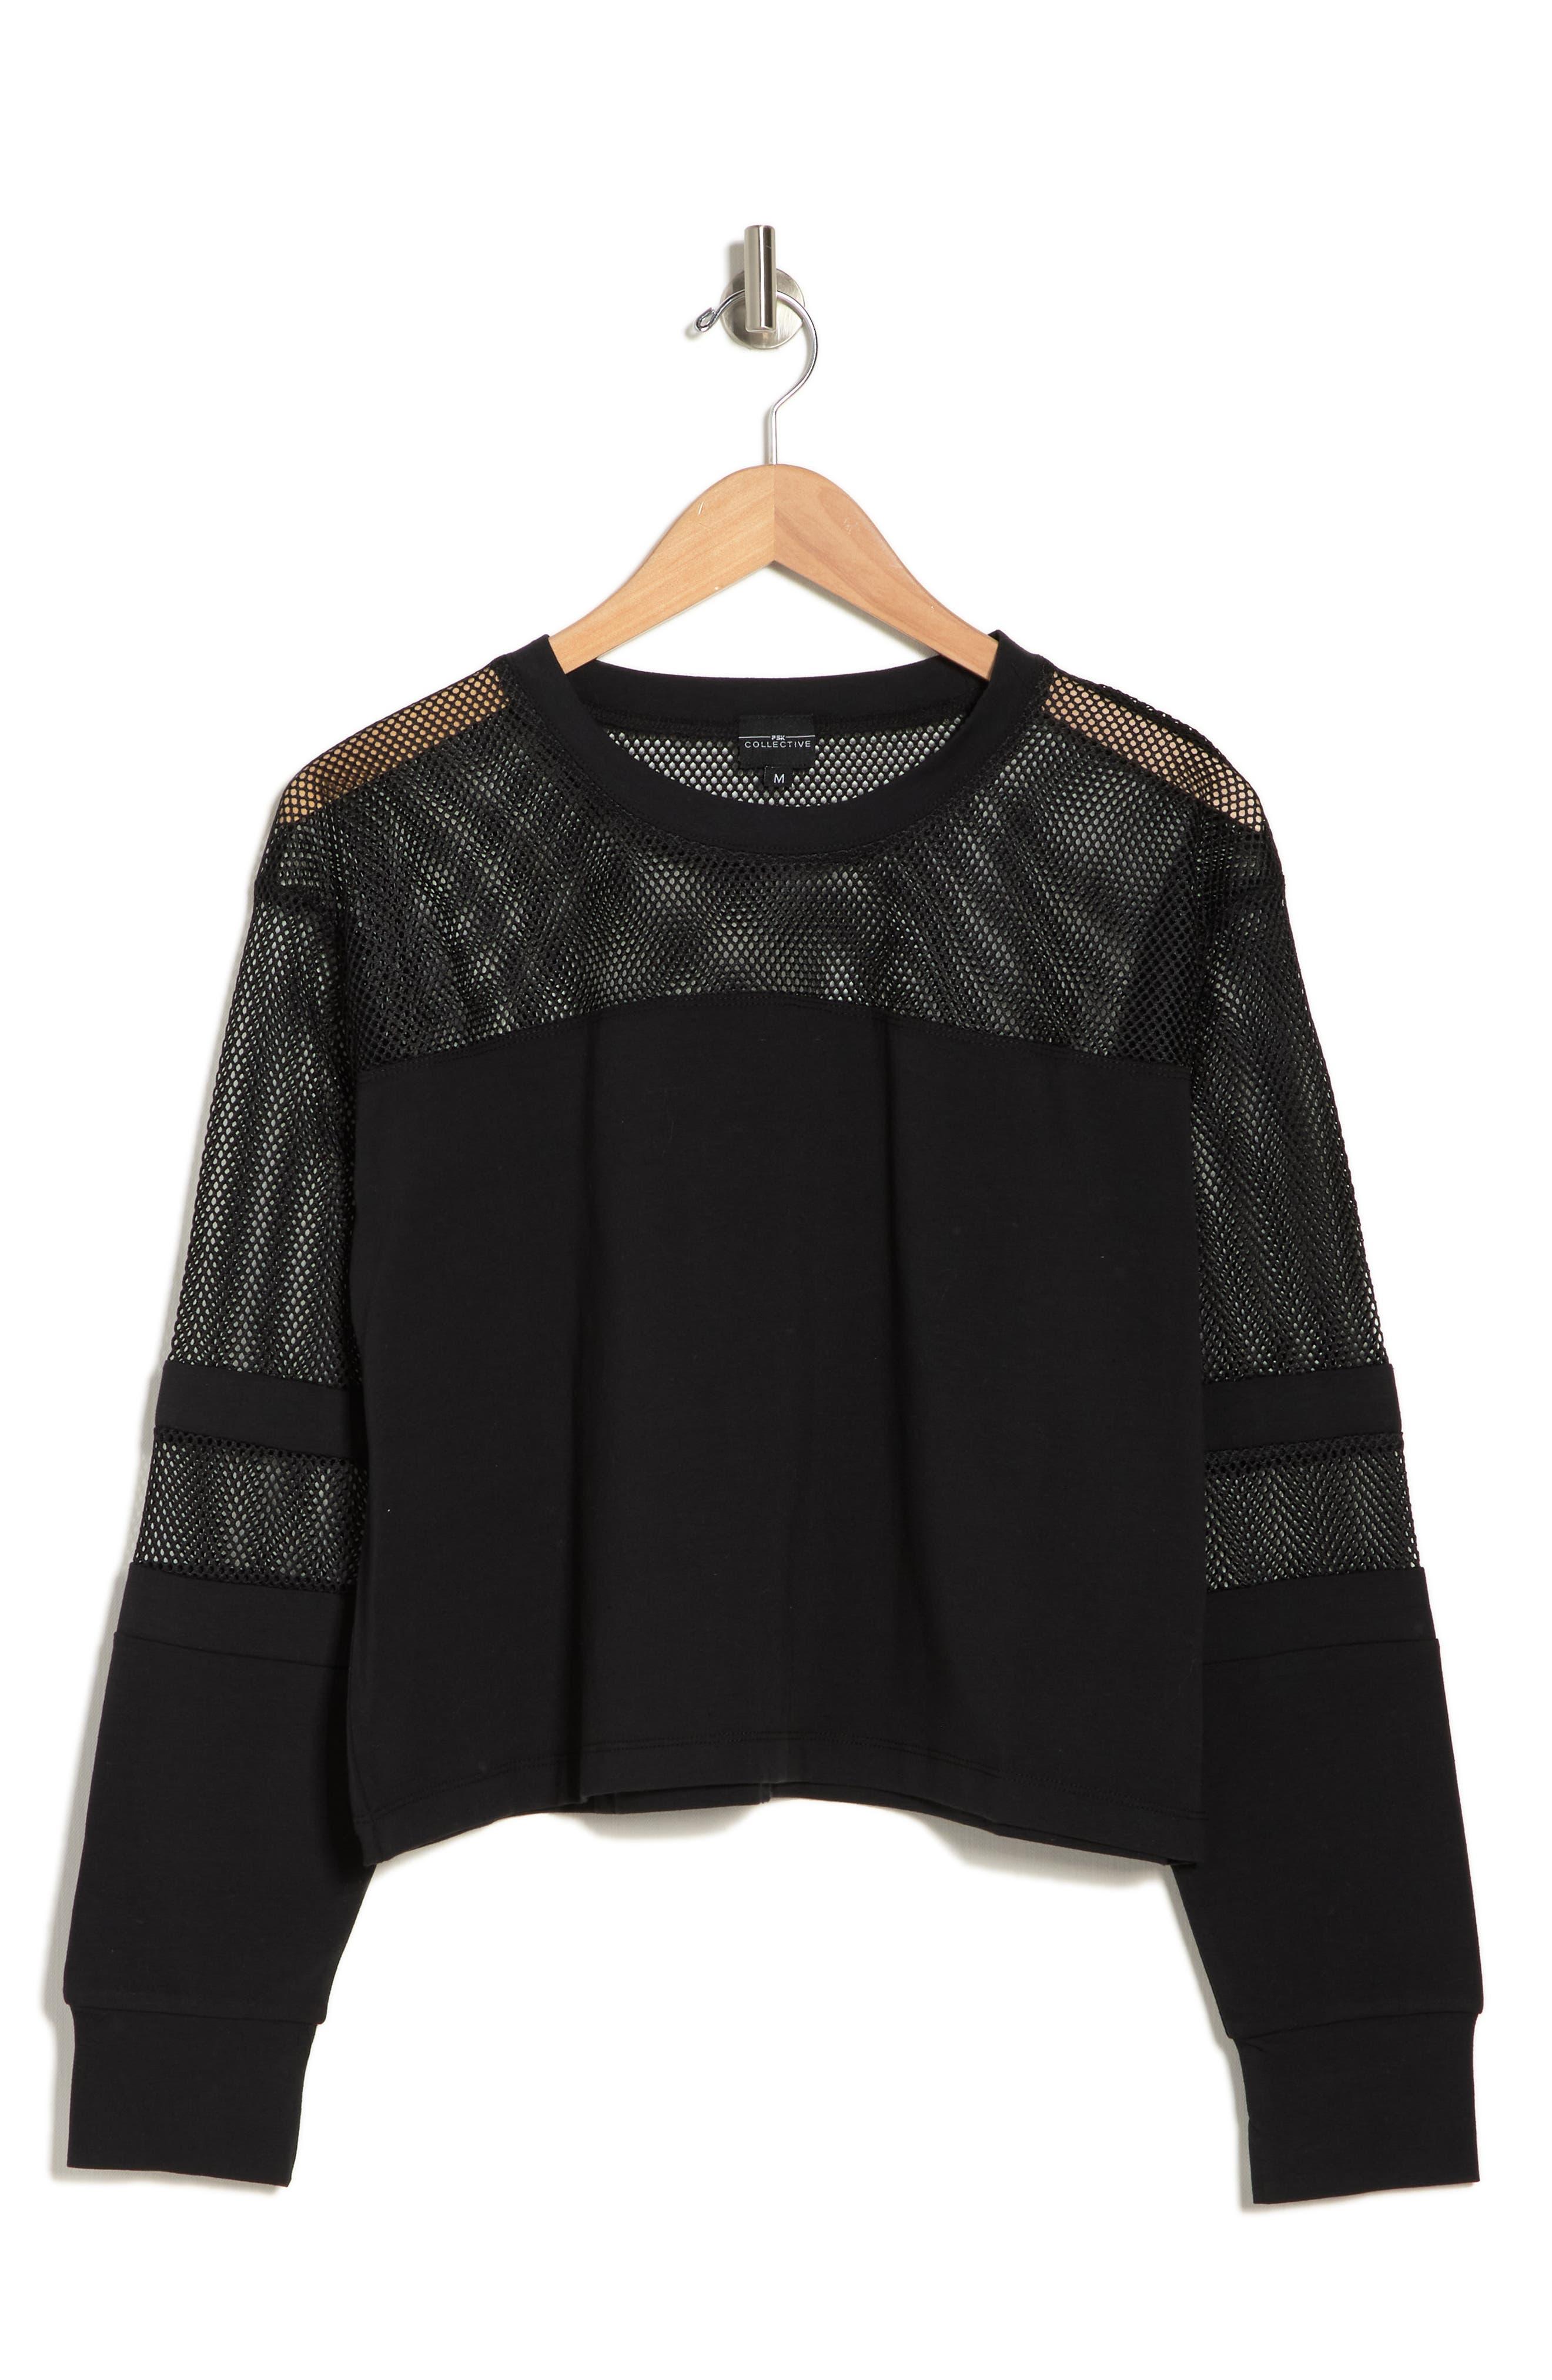 PSK COLLECTIVE Remixed Cropped Jersey Sweatshirt In Black At Nordstrom Rack